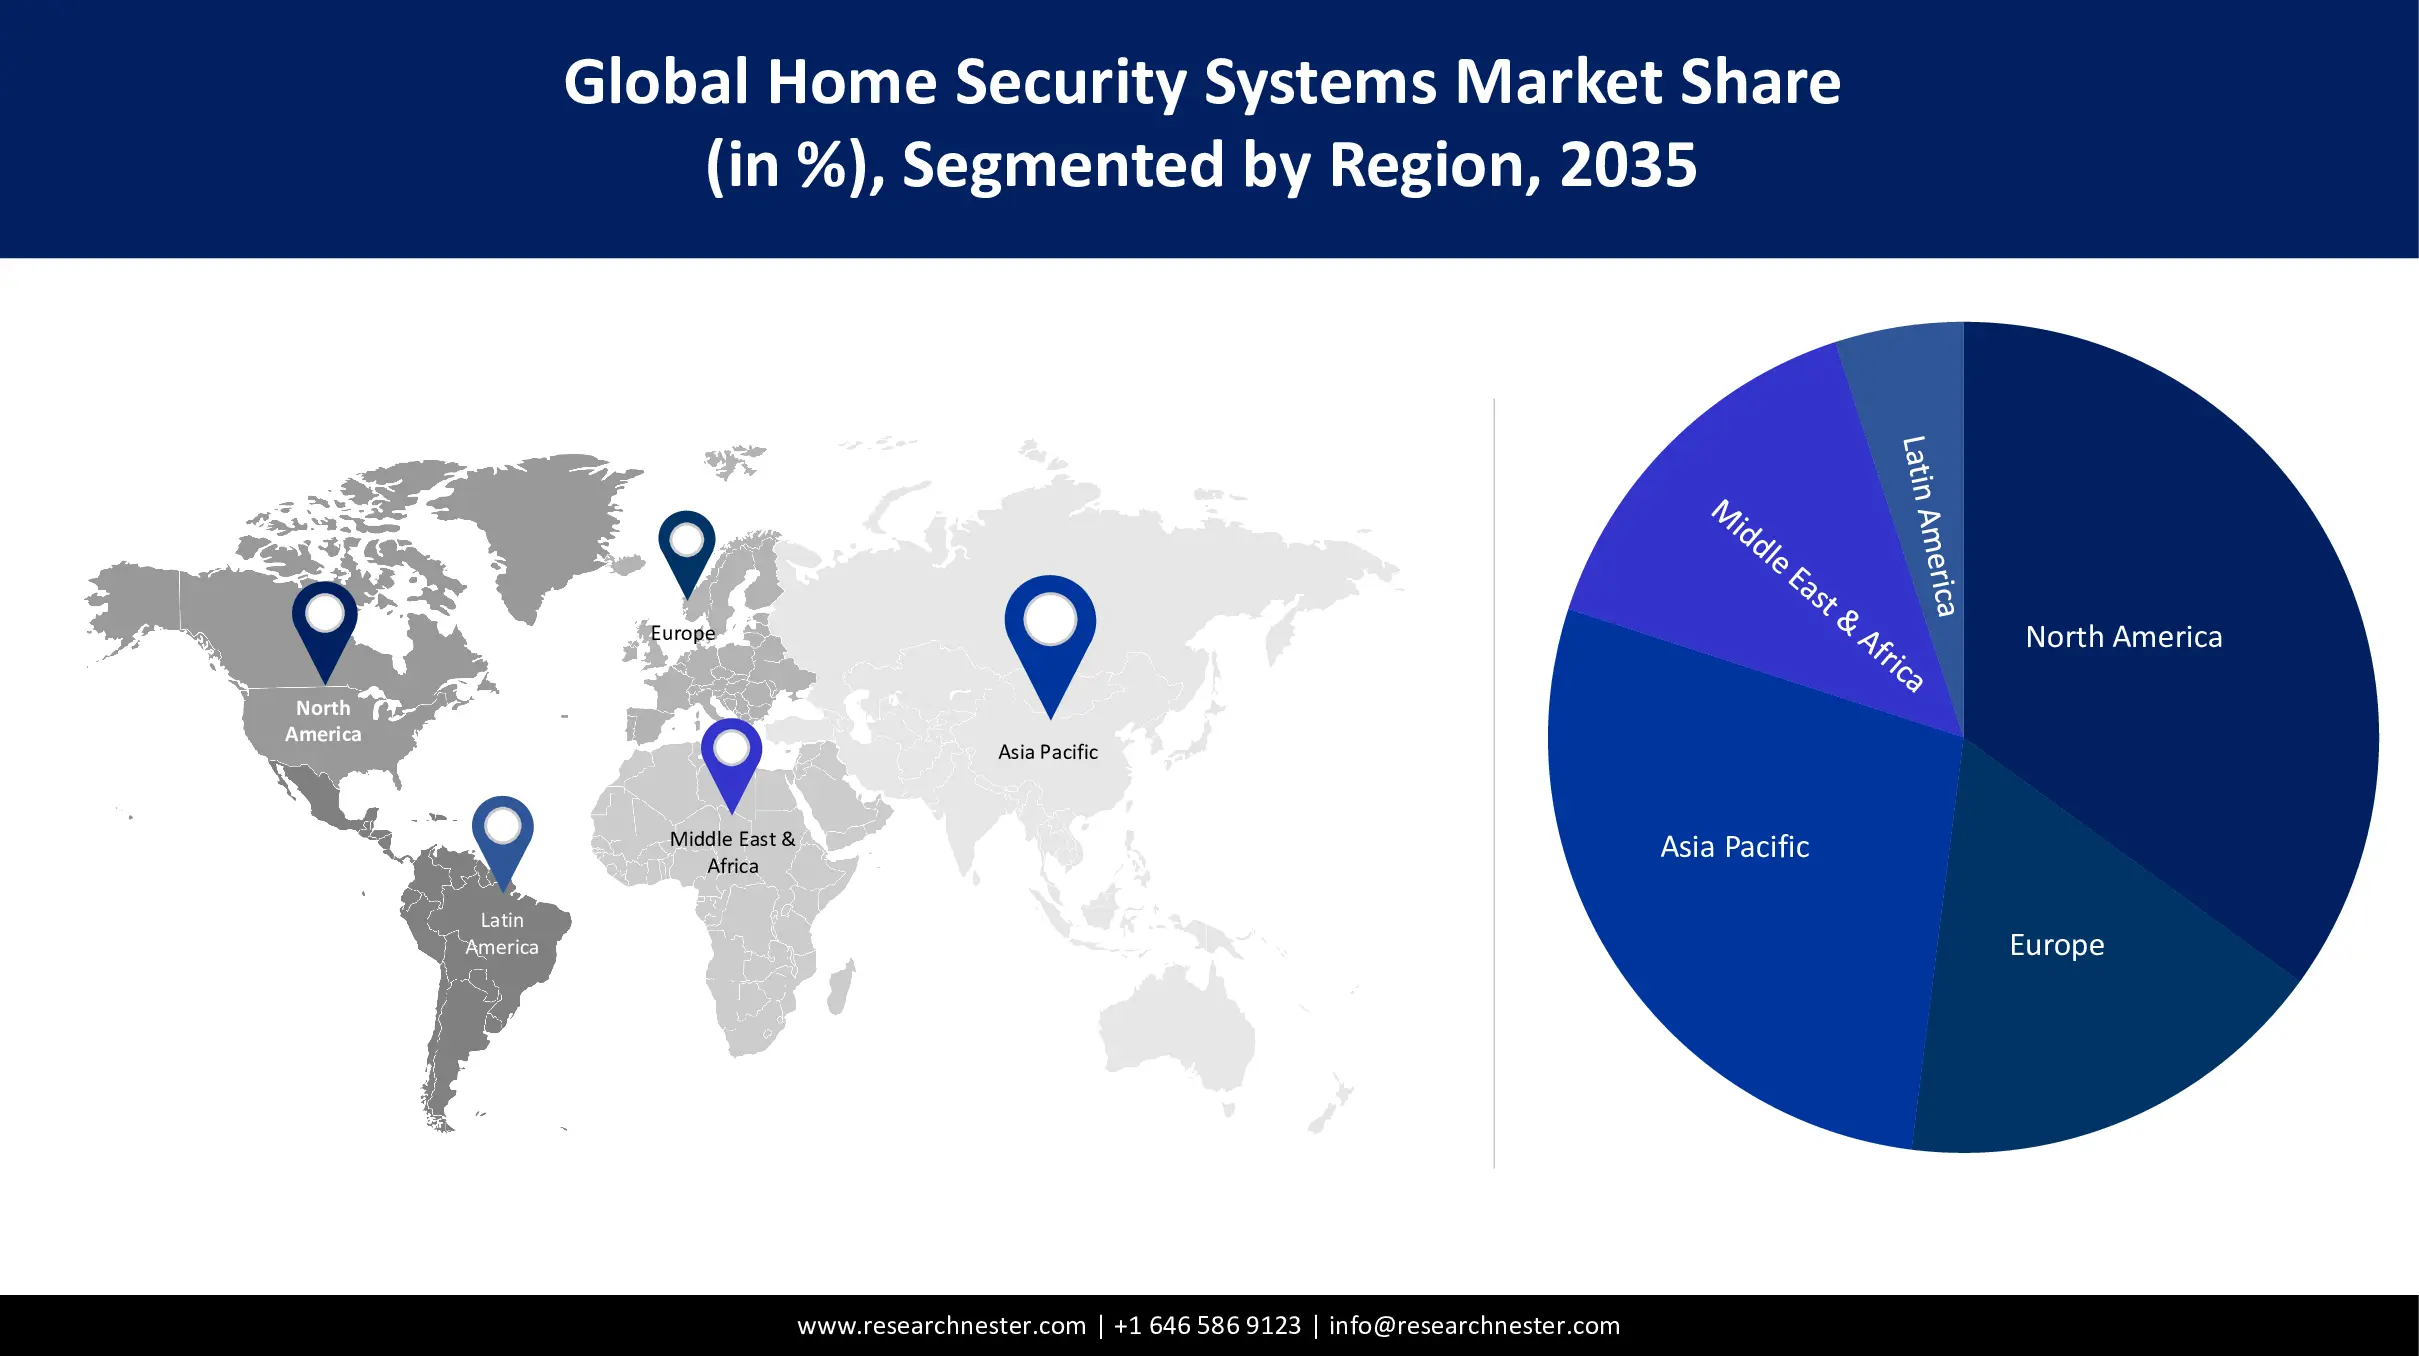 Home Security Systems Market Size